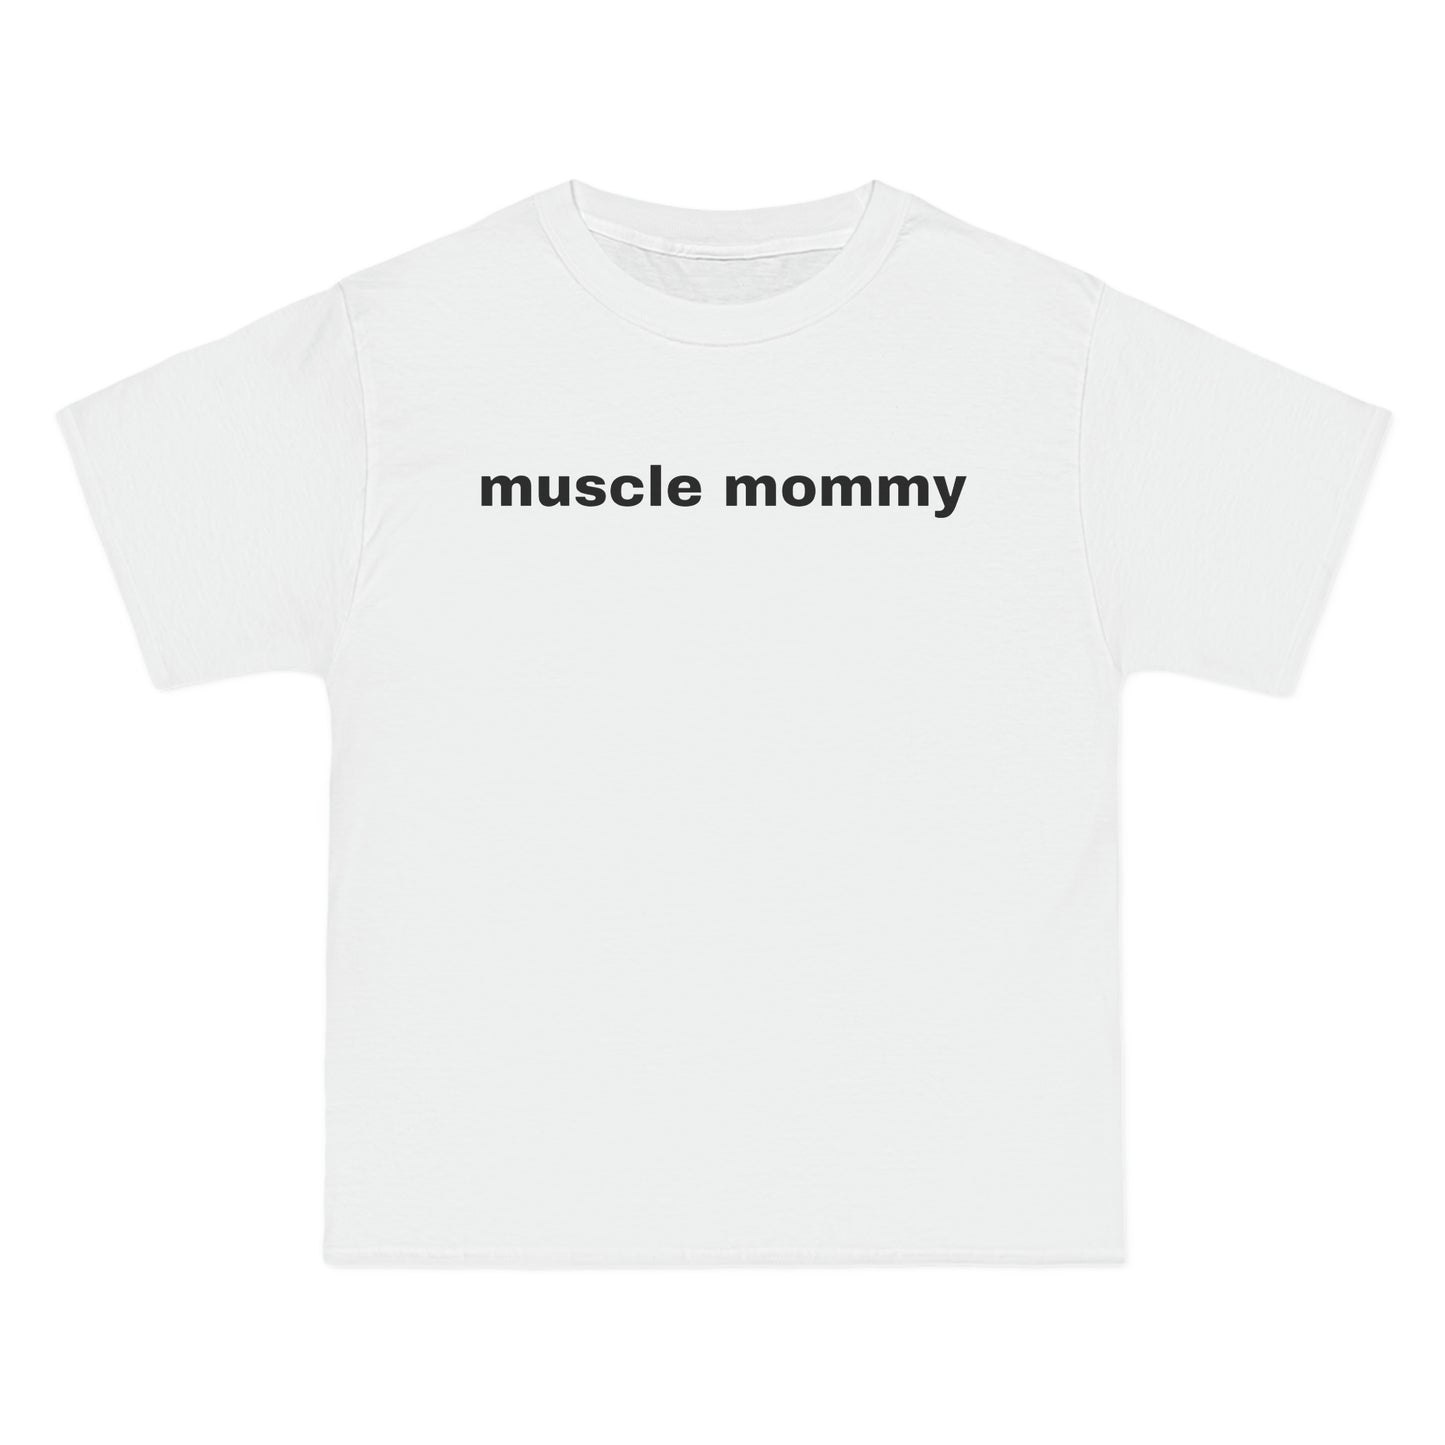 muscle mommy Tee